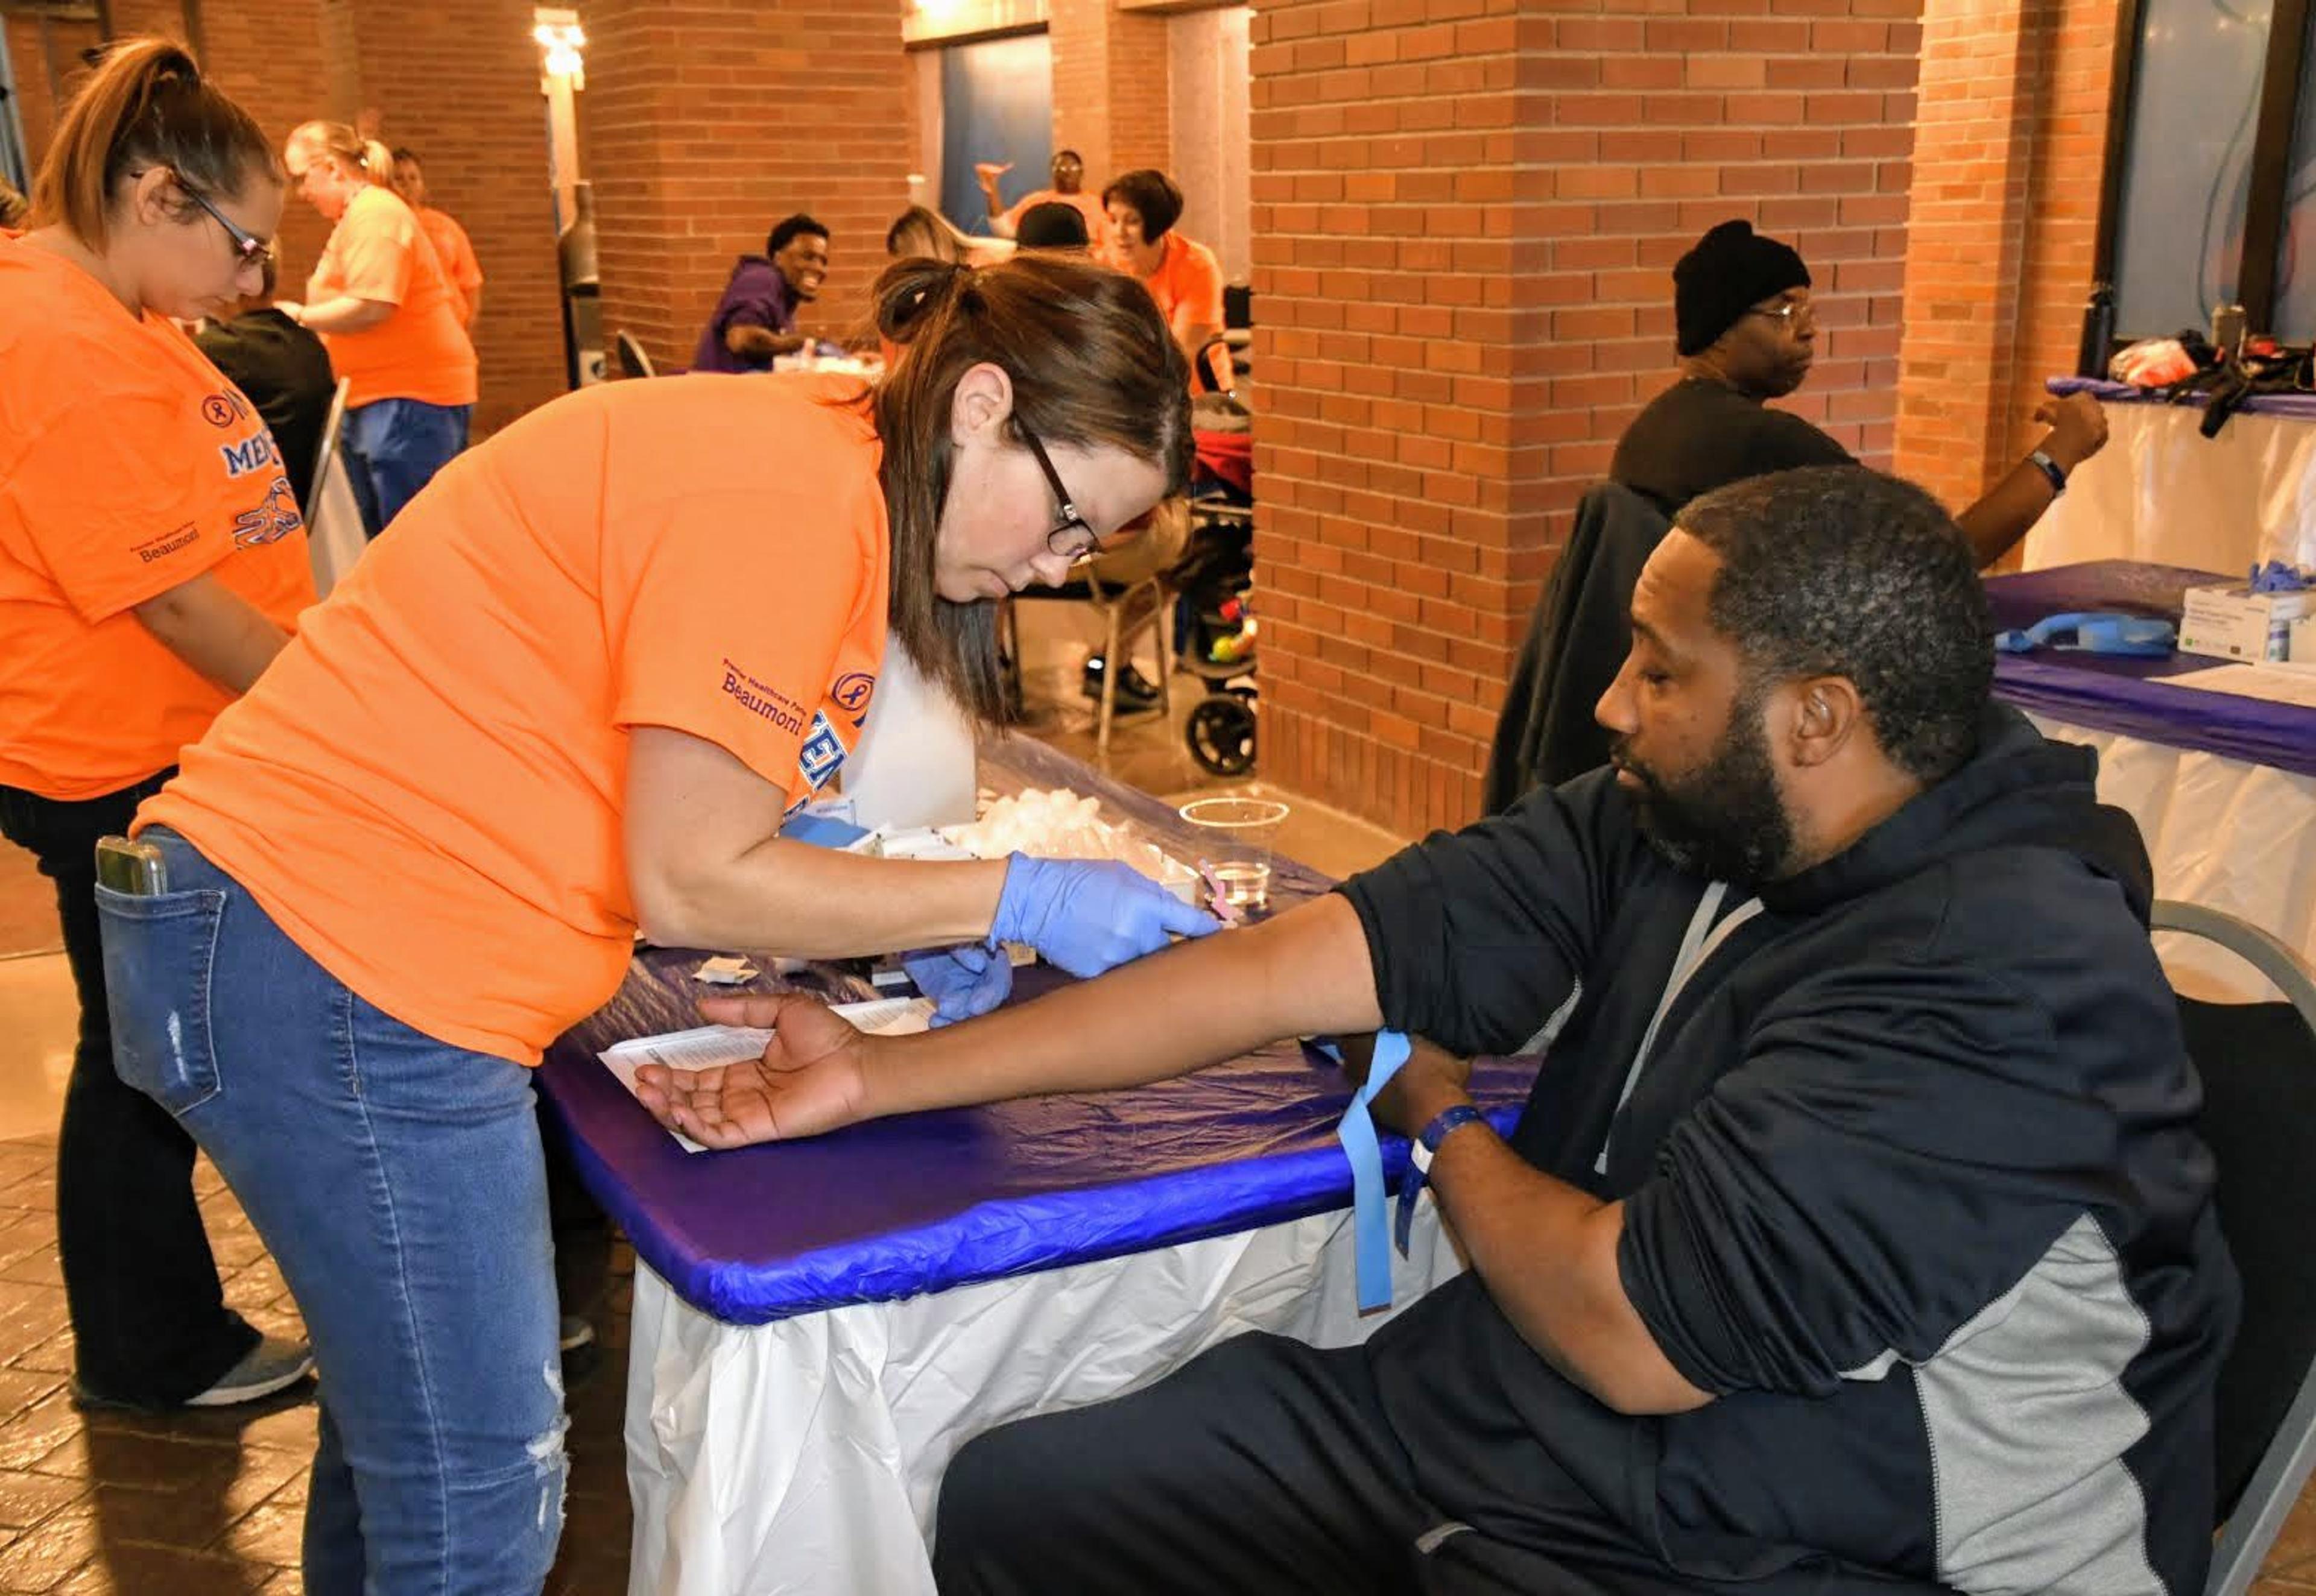 A nurse draws blood from a middle age man at the Men's Health Event